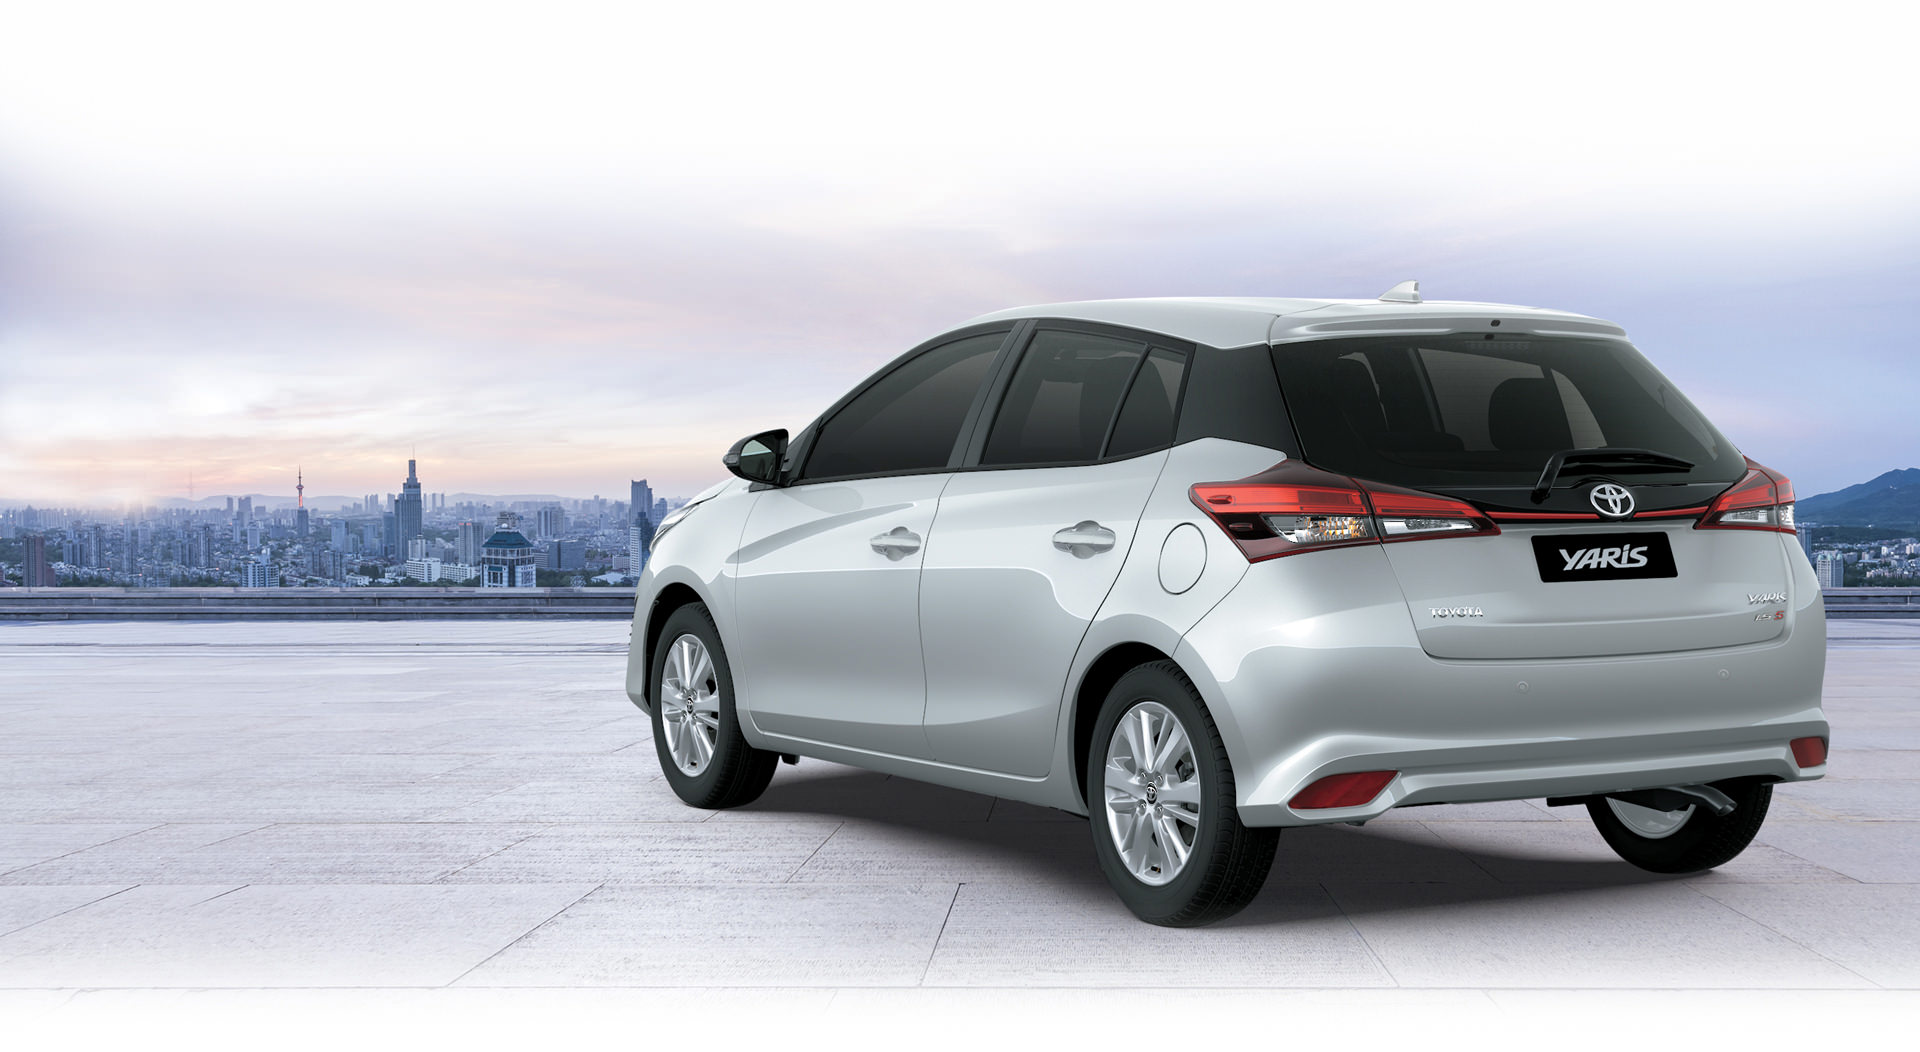 Toyota Yaris Hatchback Overview